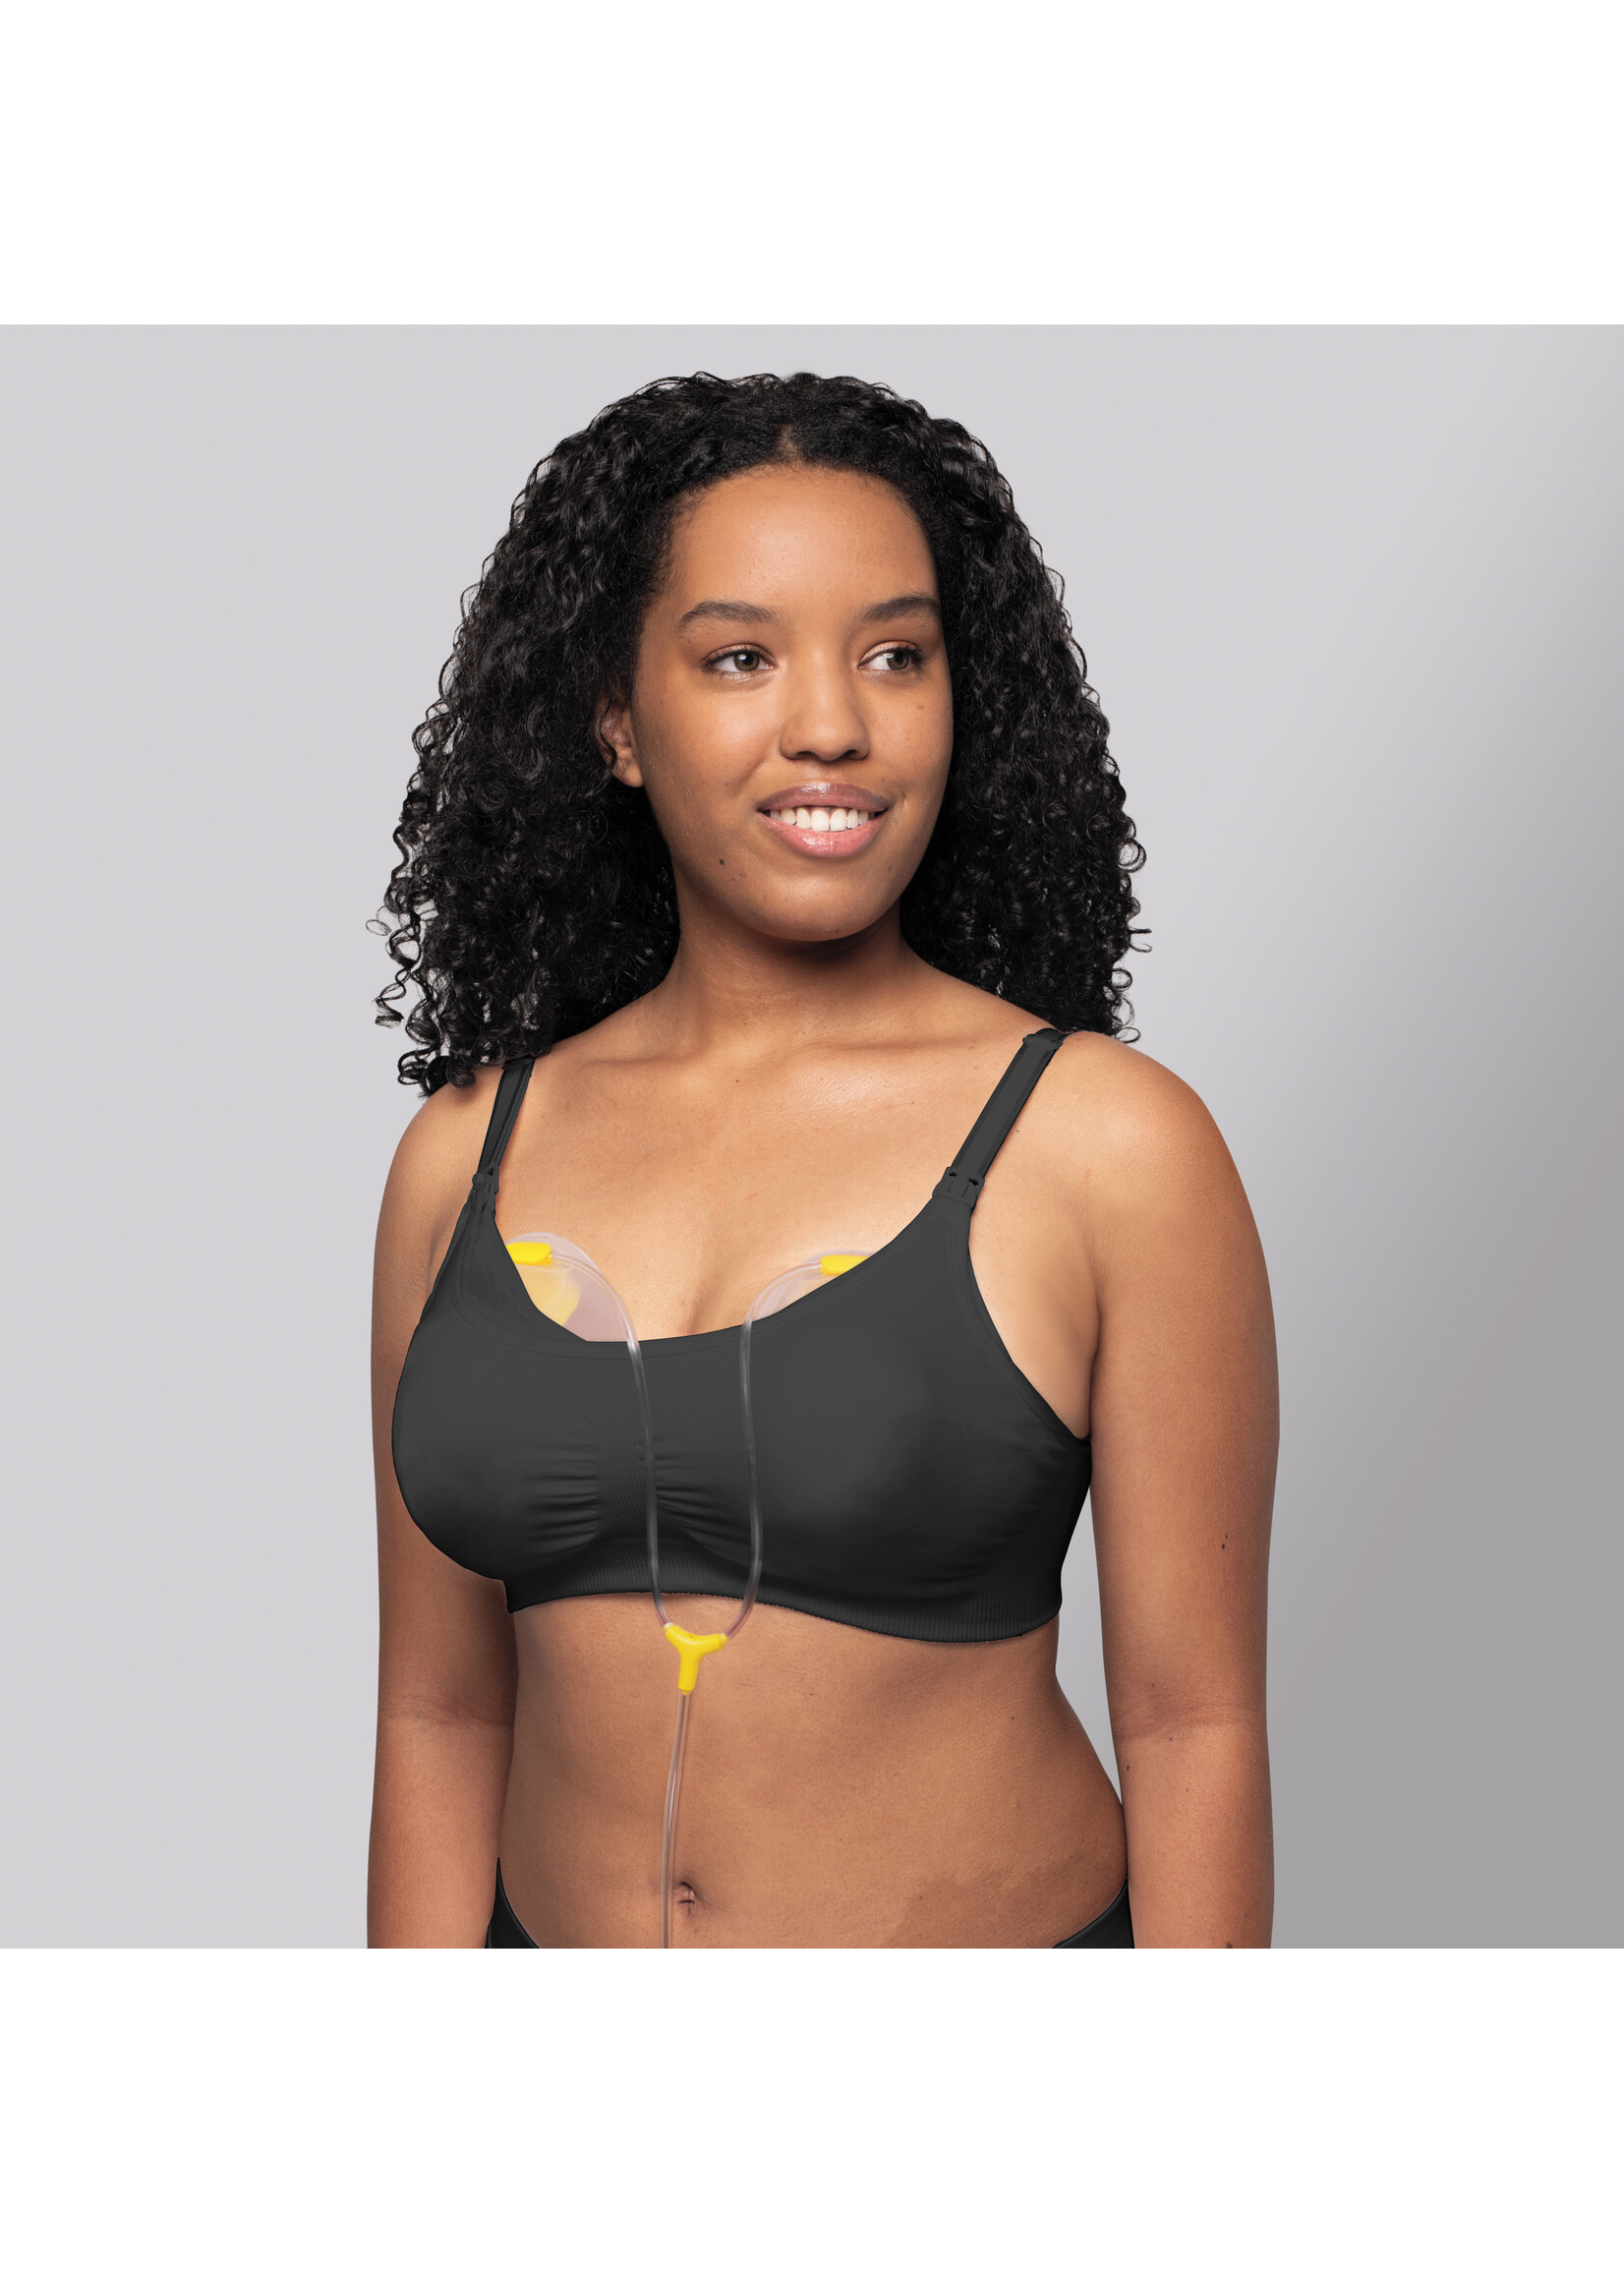 Medela 3 in 1 Nursing and Pumping Bra, Breathable, Lightweight for  Ultimate Comfort when Feeding, Electric Pumping or In-Bra Pumping, Black  Small